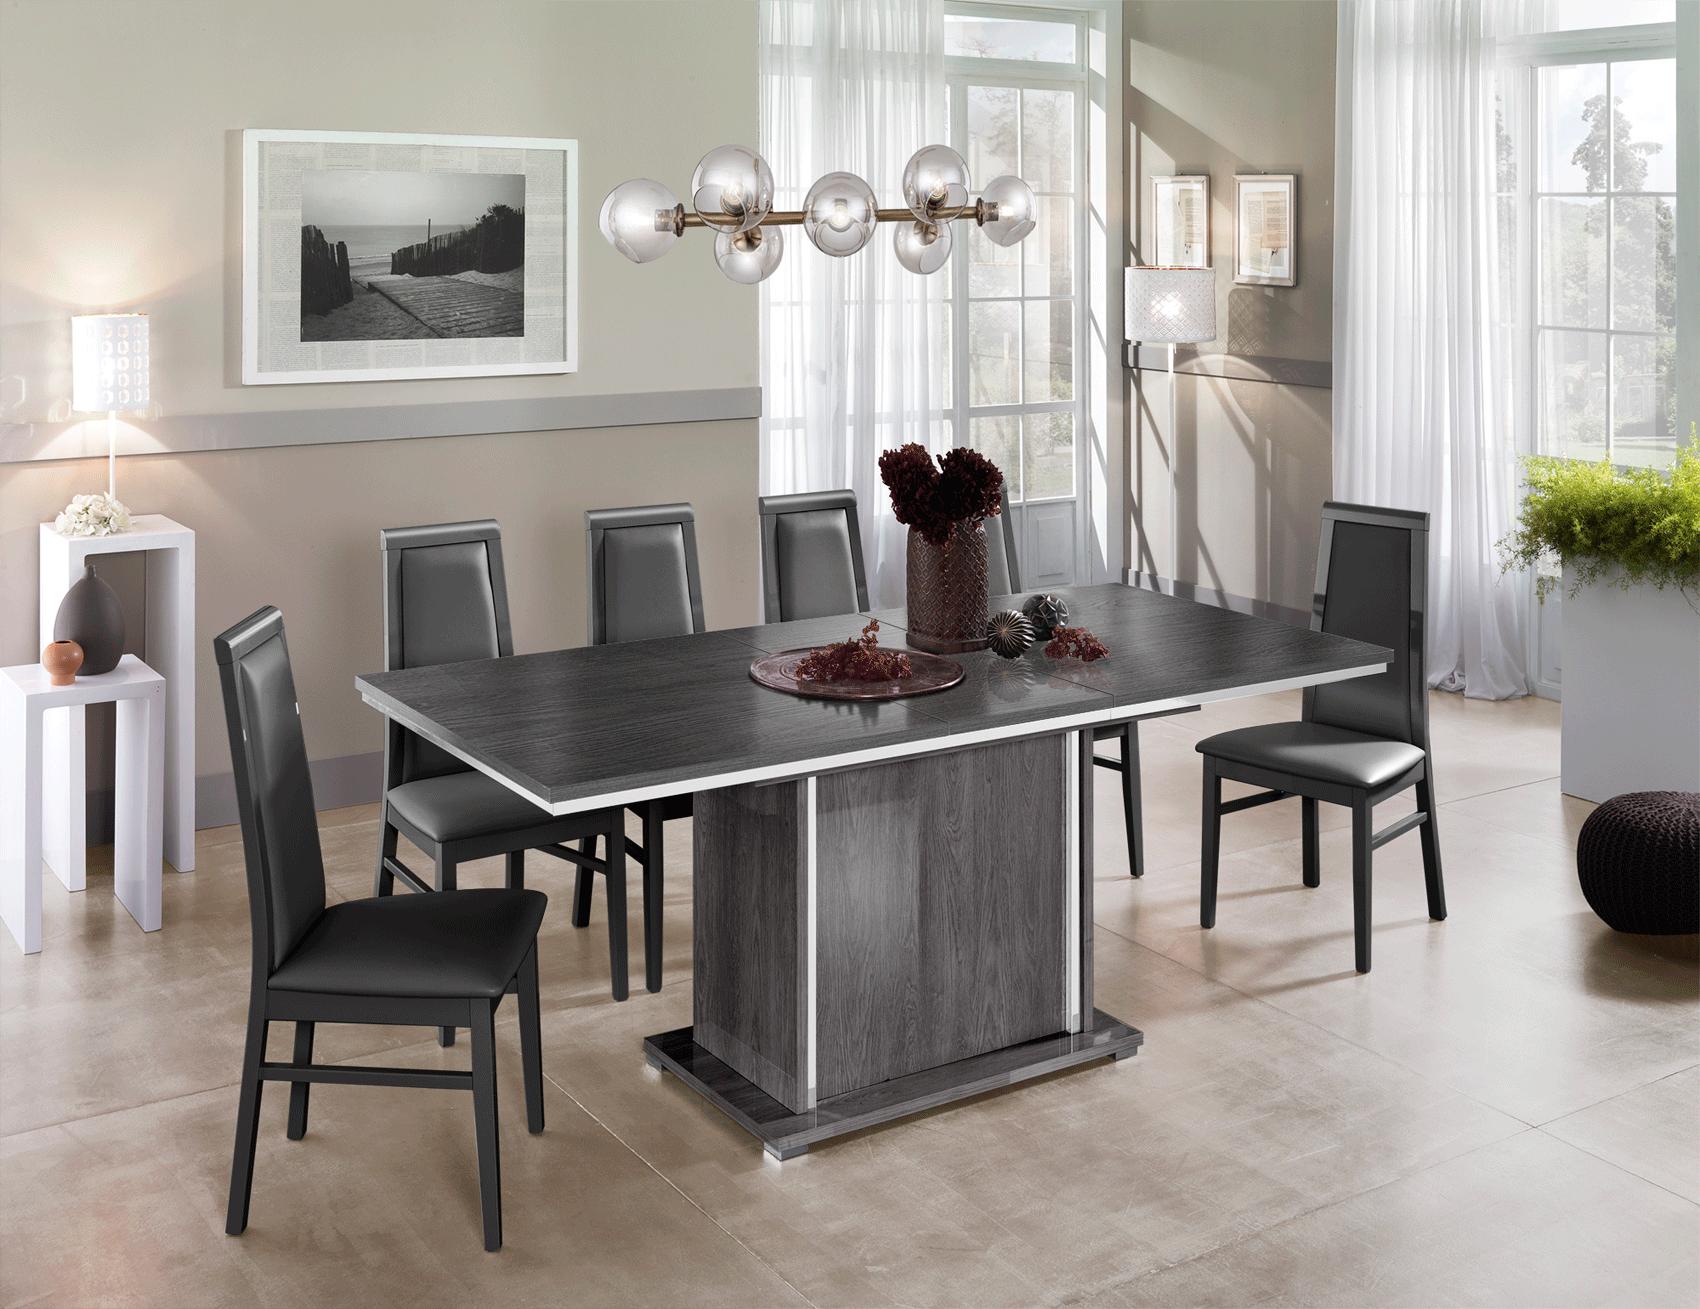 

    
High Gloss Lacquer Antracite Finish Dining Set 7Pcs Modern ESF Oxford
